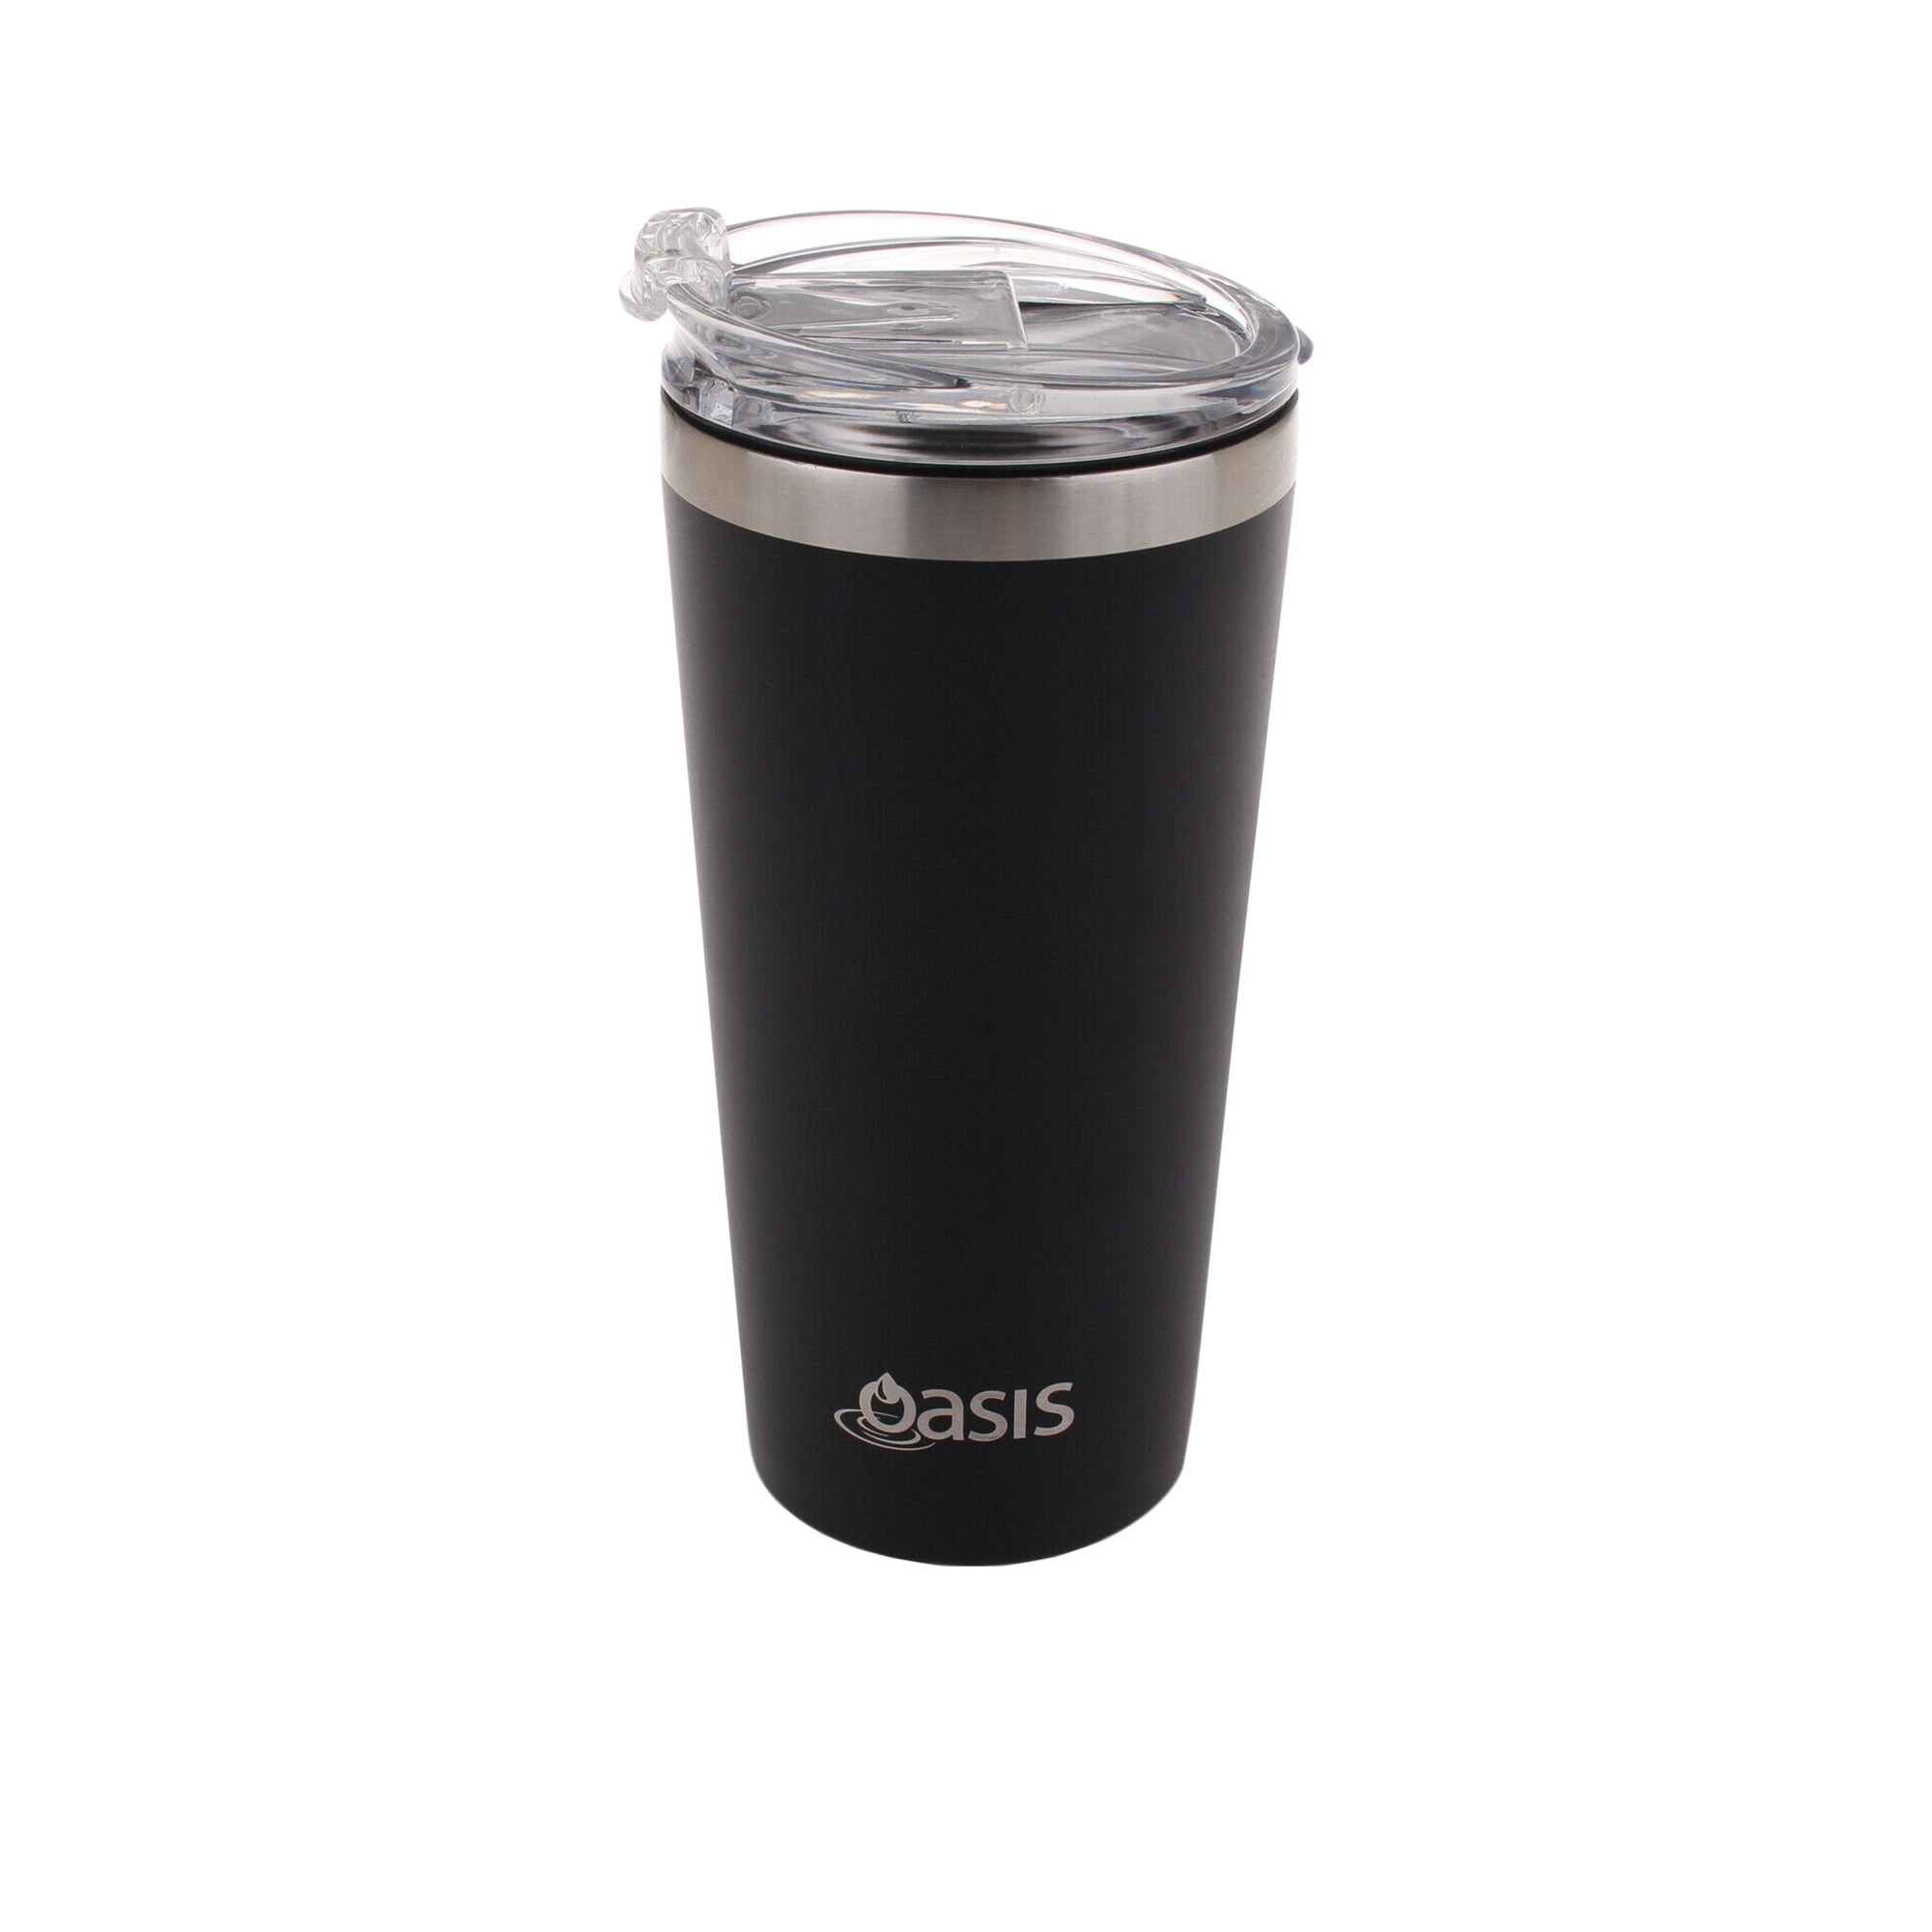 Oasis Double Wall Insulated Travel Mug with Lid 480ml Matte Black Image 1